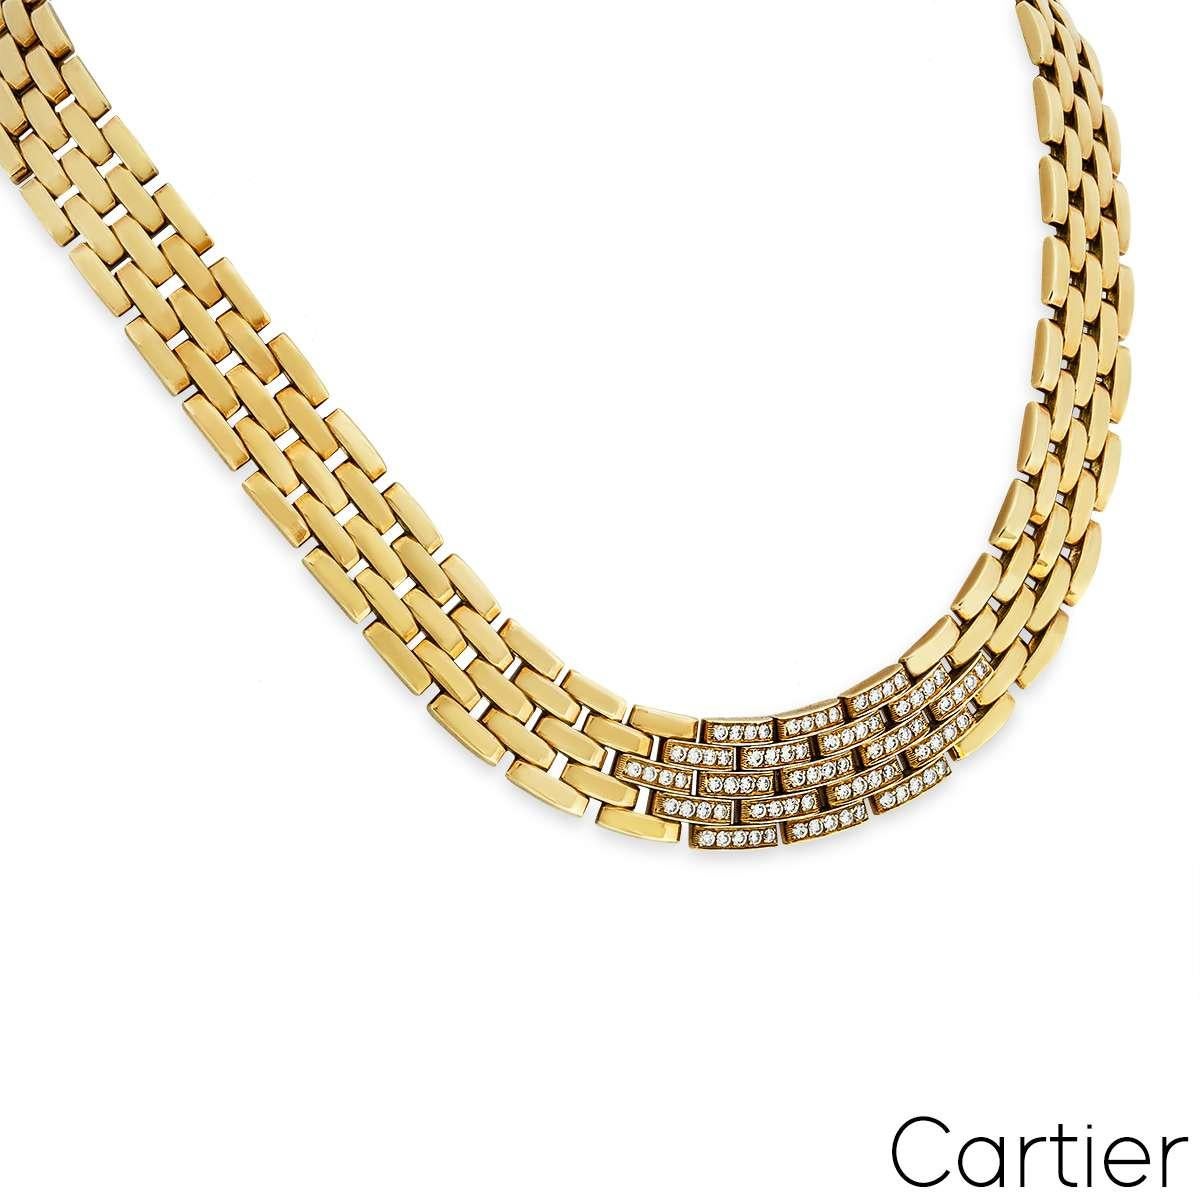 A beautiful 18k yellow gold Cartier diamond Maillon Panthere necklace from the Links and Chains collection. The necklace comprises of 4 rows of 41 iconic Panthere Maillon links complemented with 48 round brilliant cut diamonds in a pave setting, set